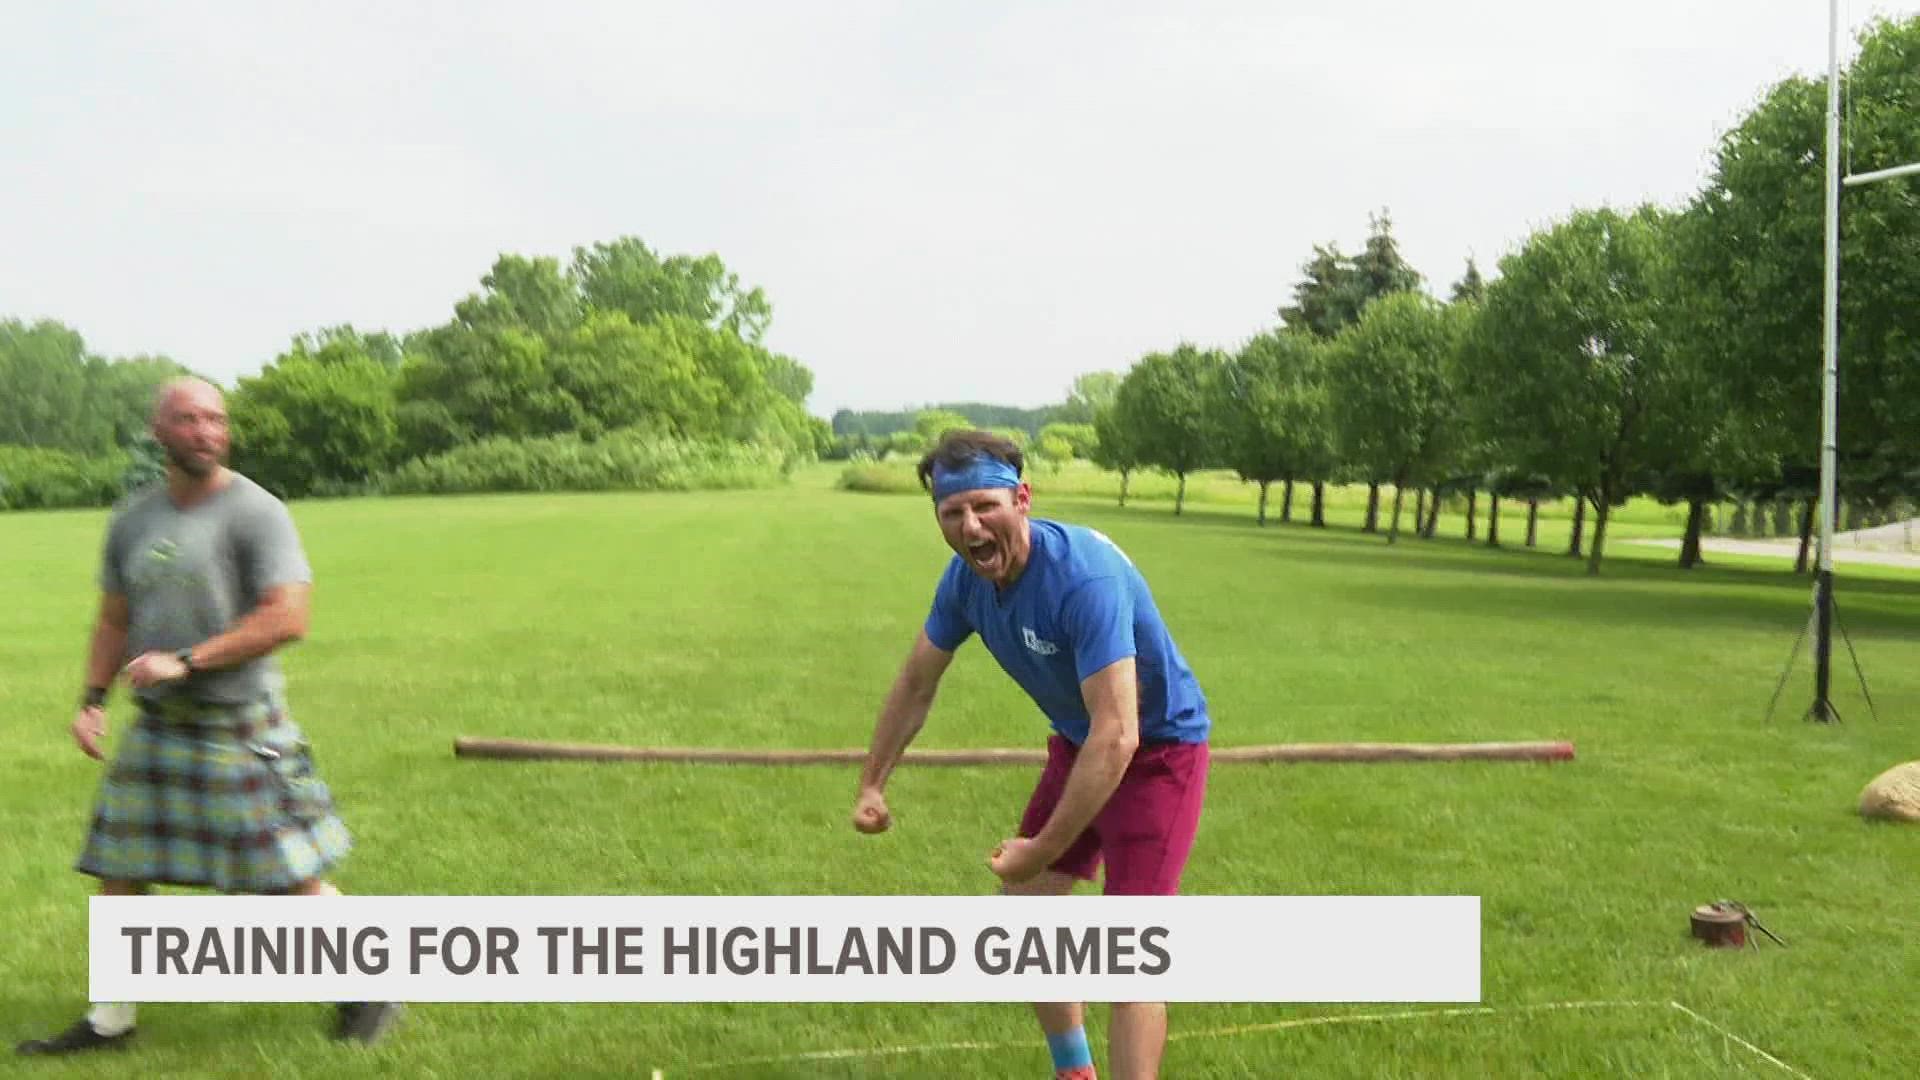 Ahead of the inaugural Celtic Festival and Highland Games this weekend, the 13 ON YOUR SIDE Mornings team tried out some of the games!